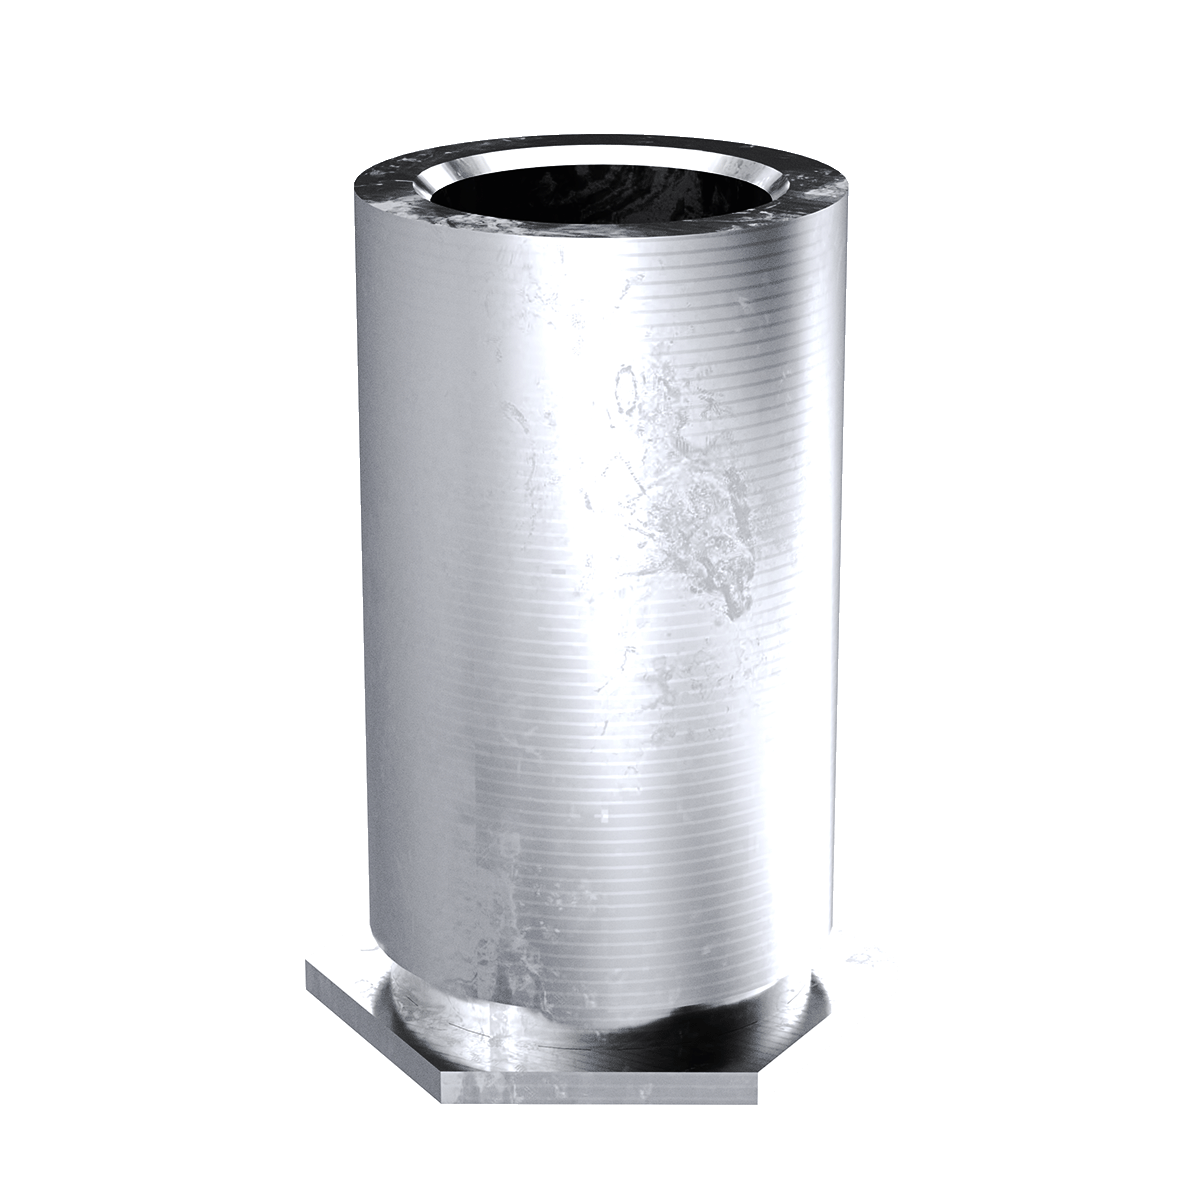 Self-Clinching Standoff, Through Unthreaded, 300 Series Stainless Steel, Passivated, 0.169 x 0.125, 100 Pack